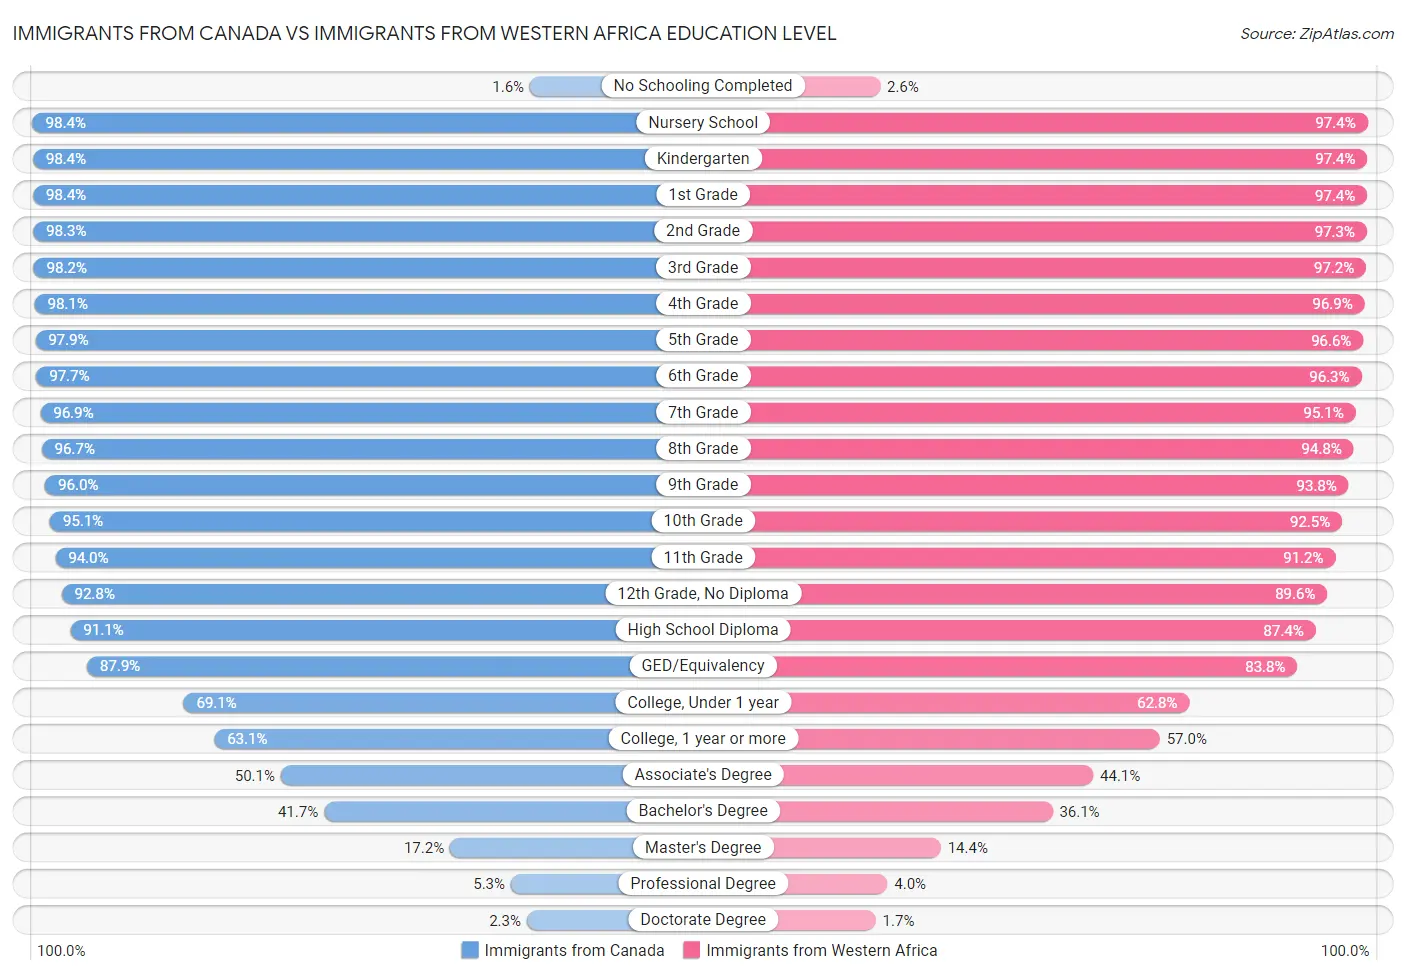 Immigrants from Canada vs Immigrants from Western Africa Education Level